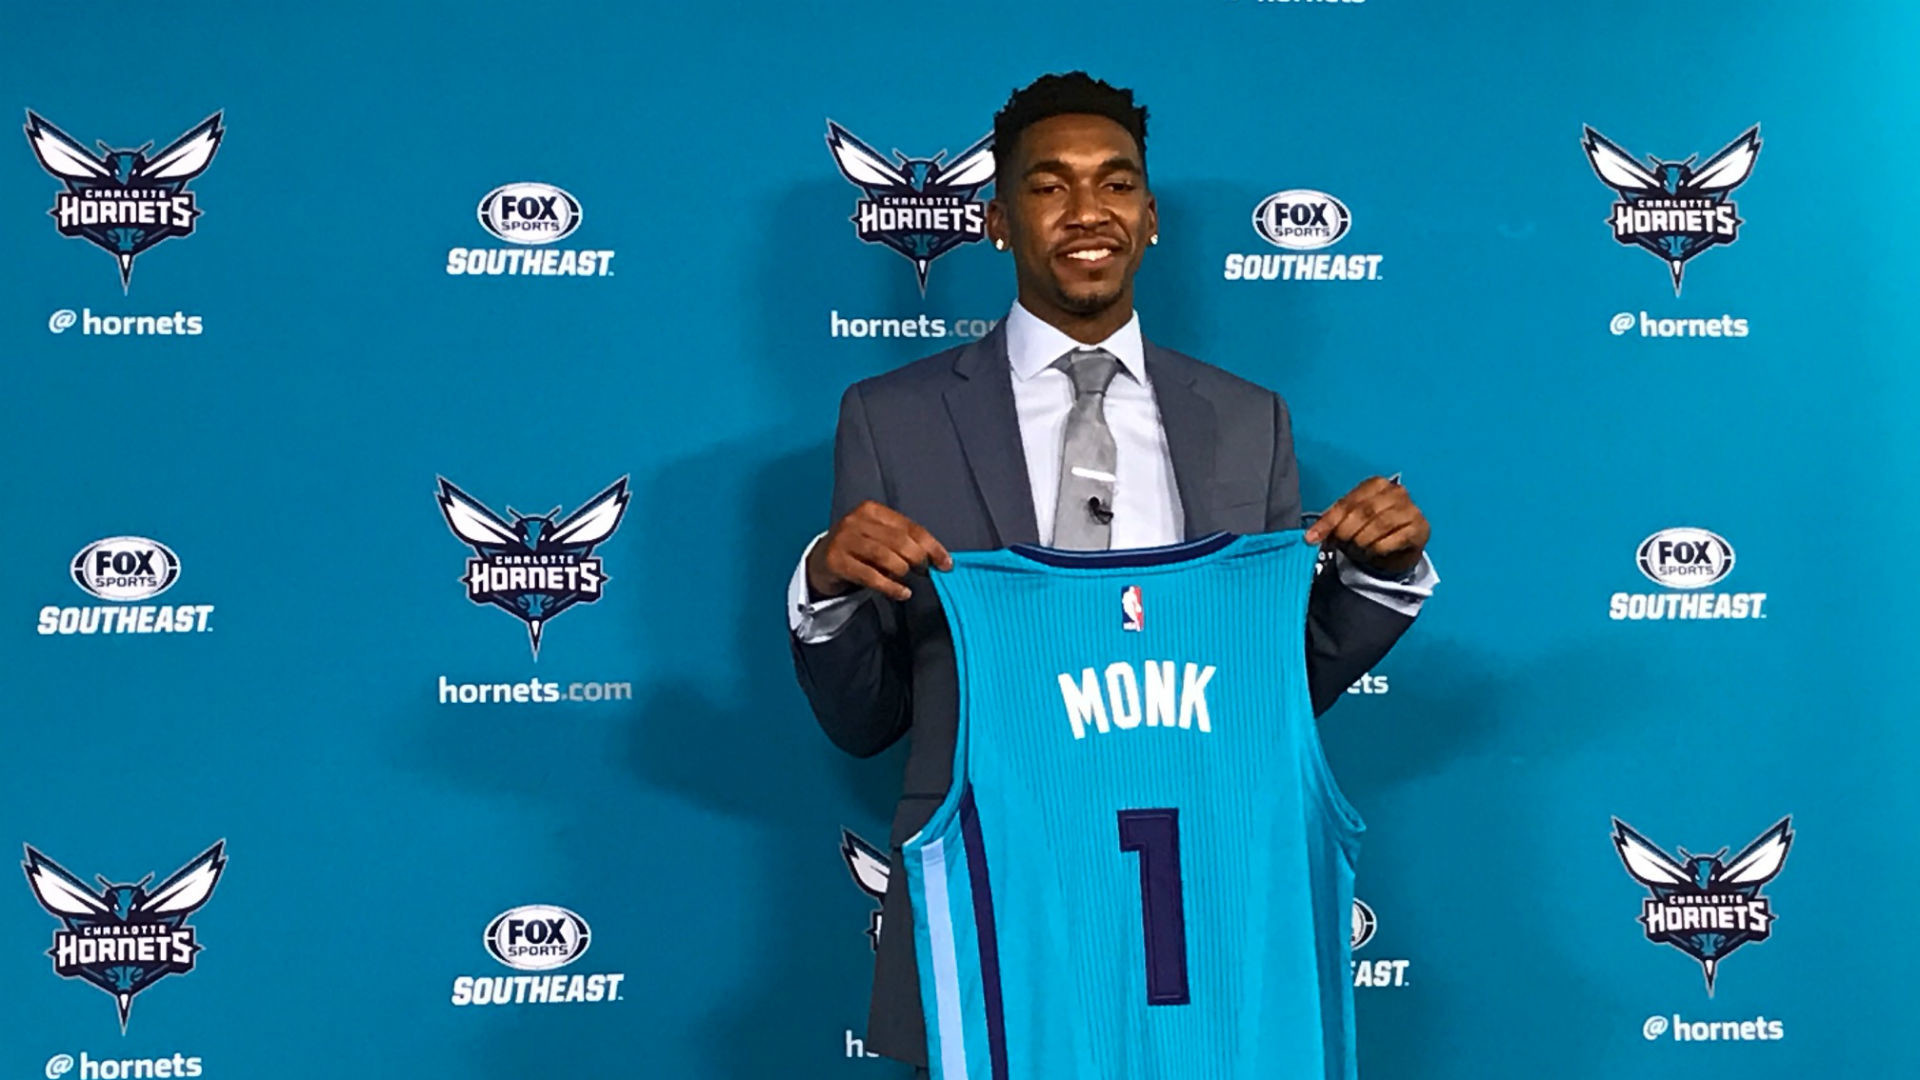 1920x1080 Hornets exceptionally fortunate to land player of Malik Monk's skill | NBA  | Sporting News